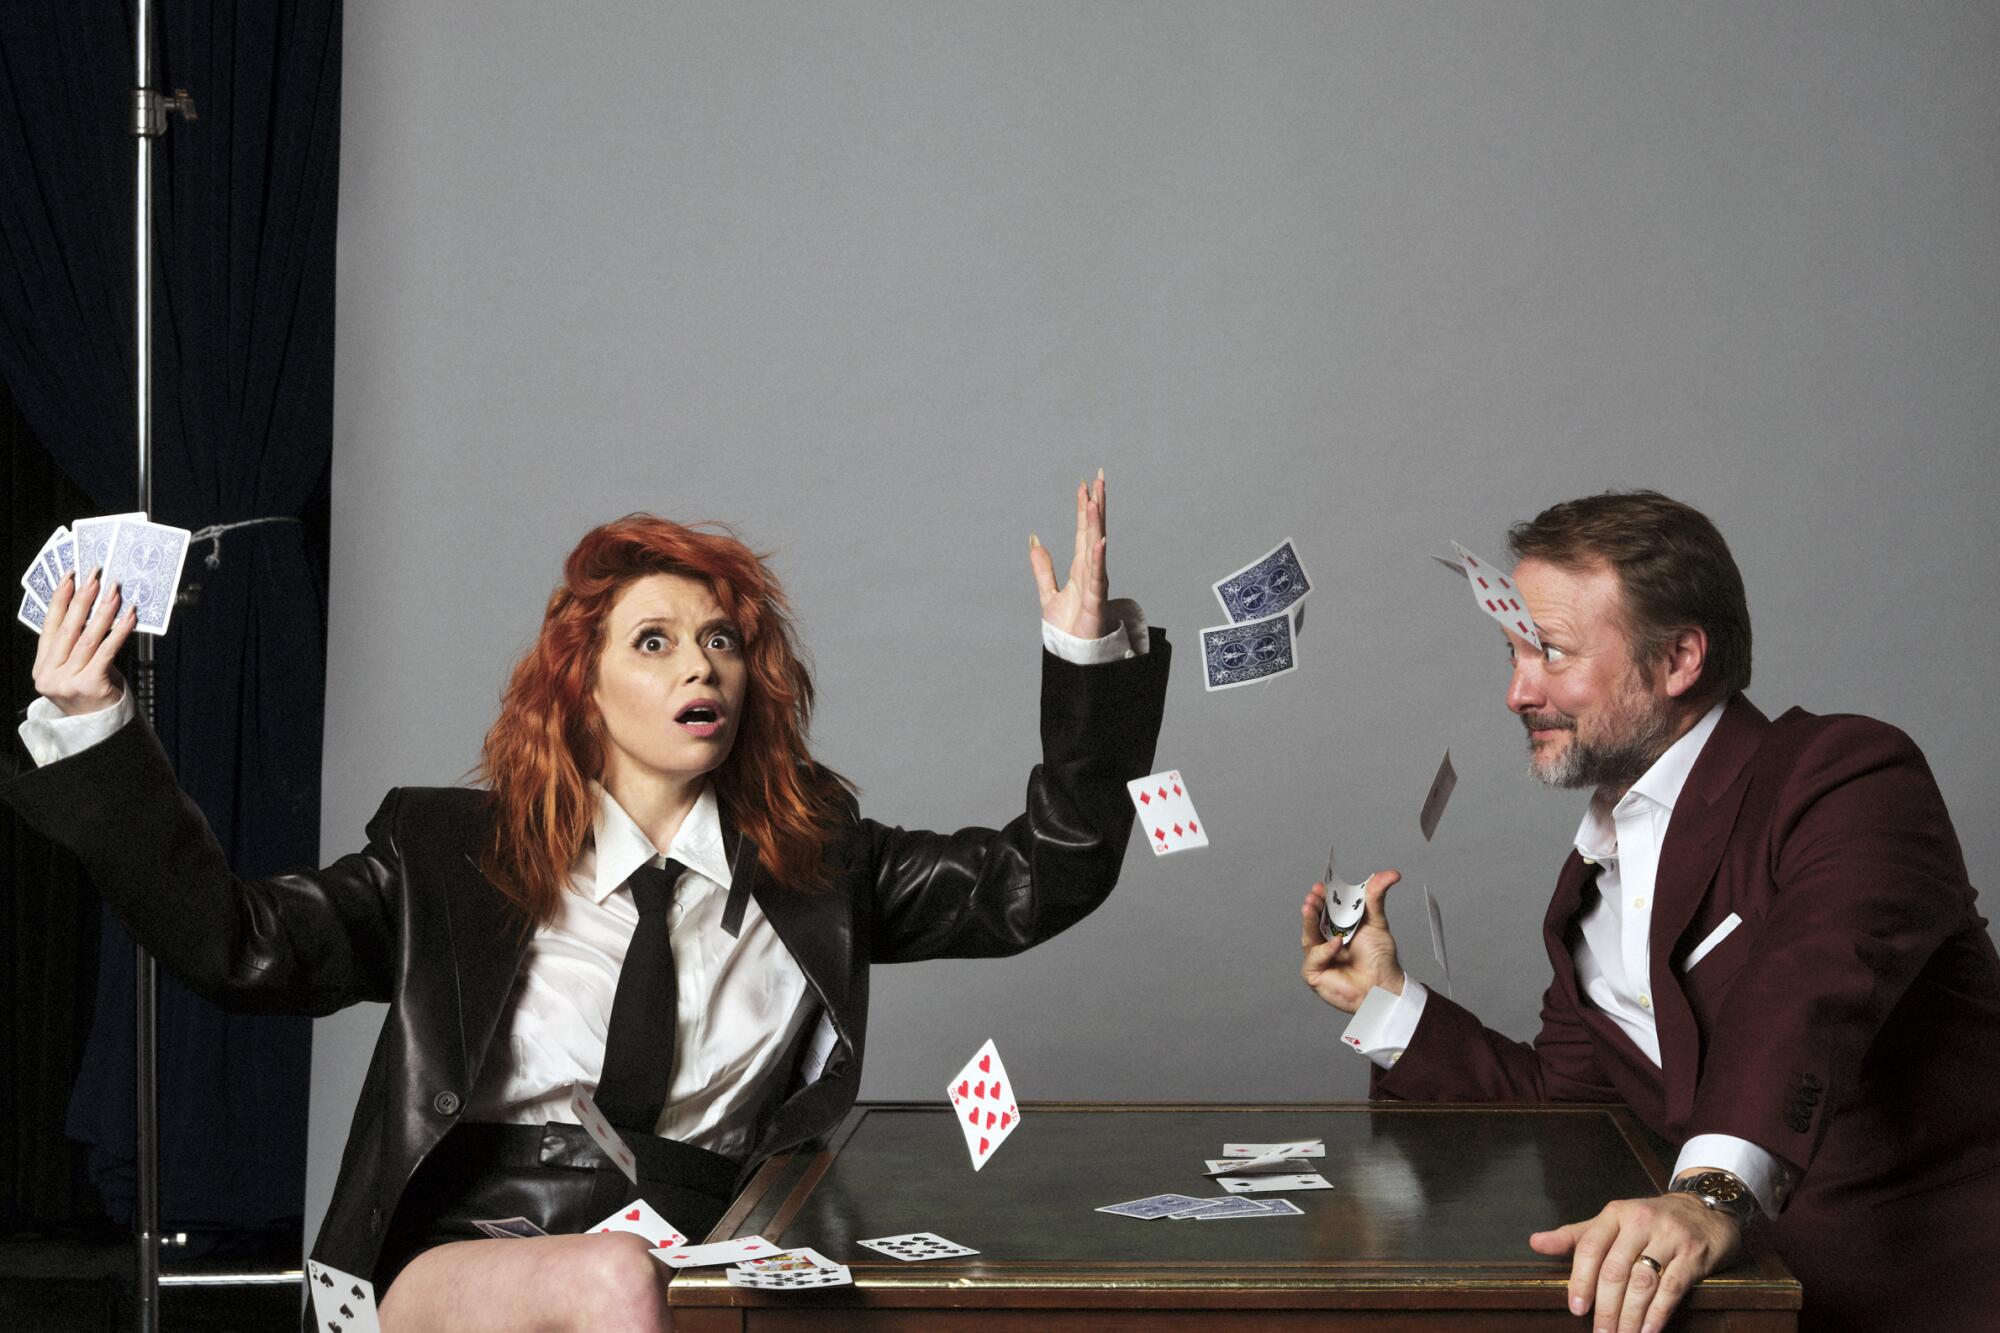 Natasha Lyonne on Revisiting the Mystery-of-the-Week with 'Poker